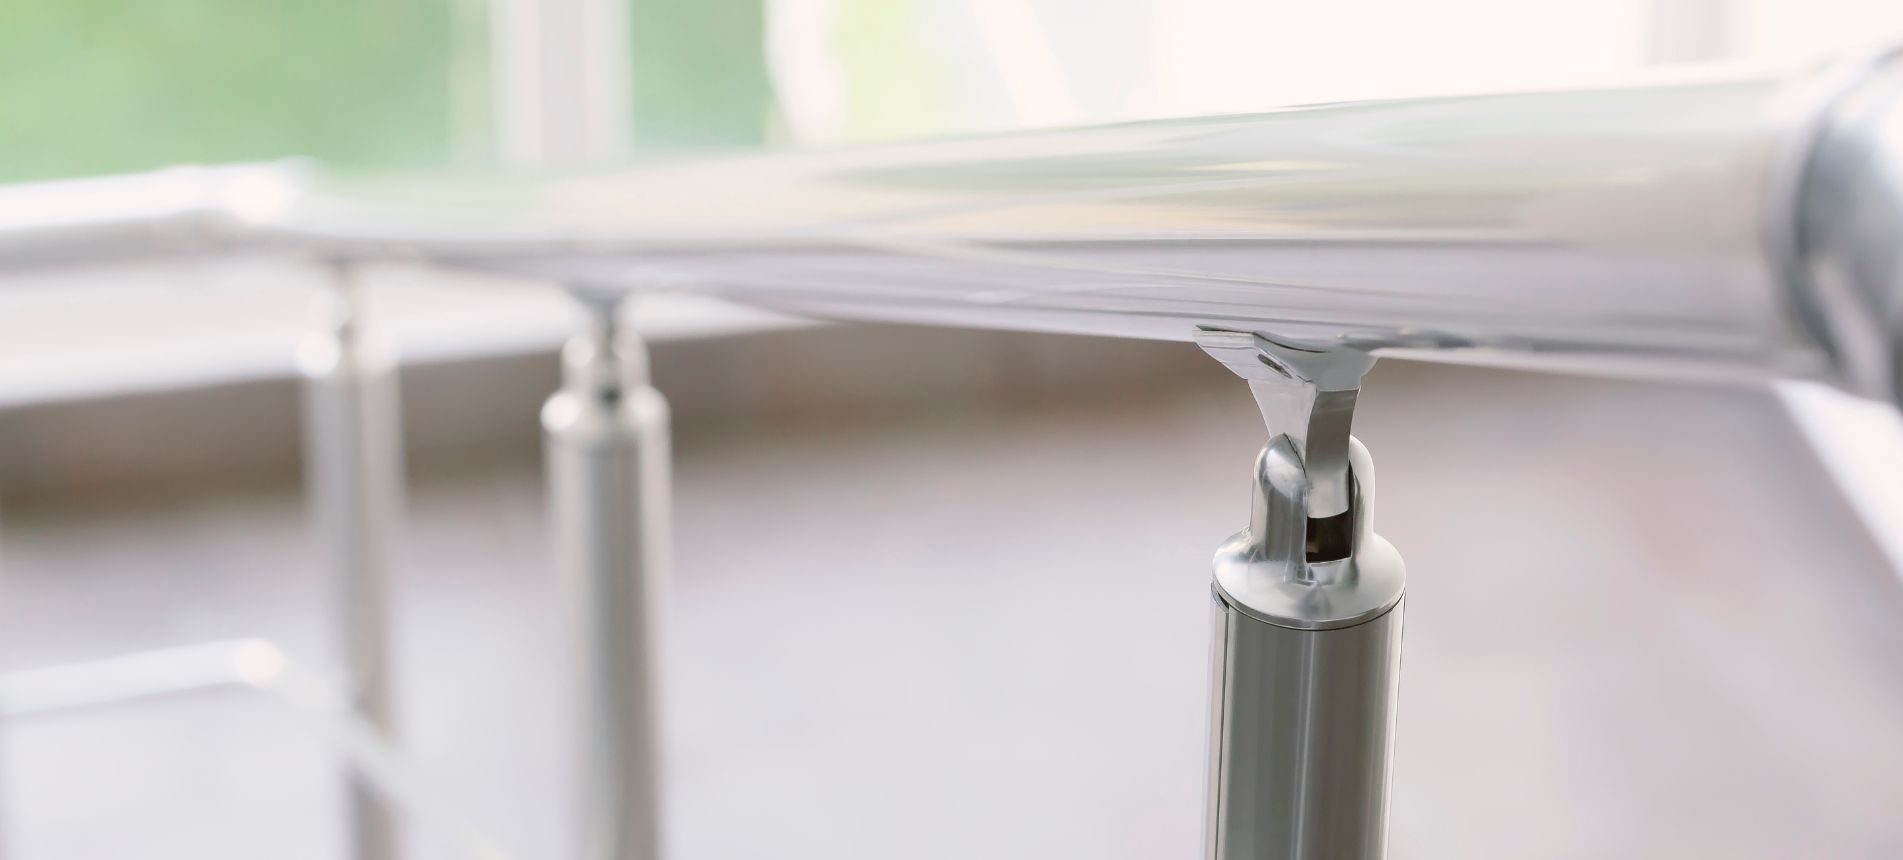 3 Common Reasons To Install Handrails at Home